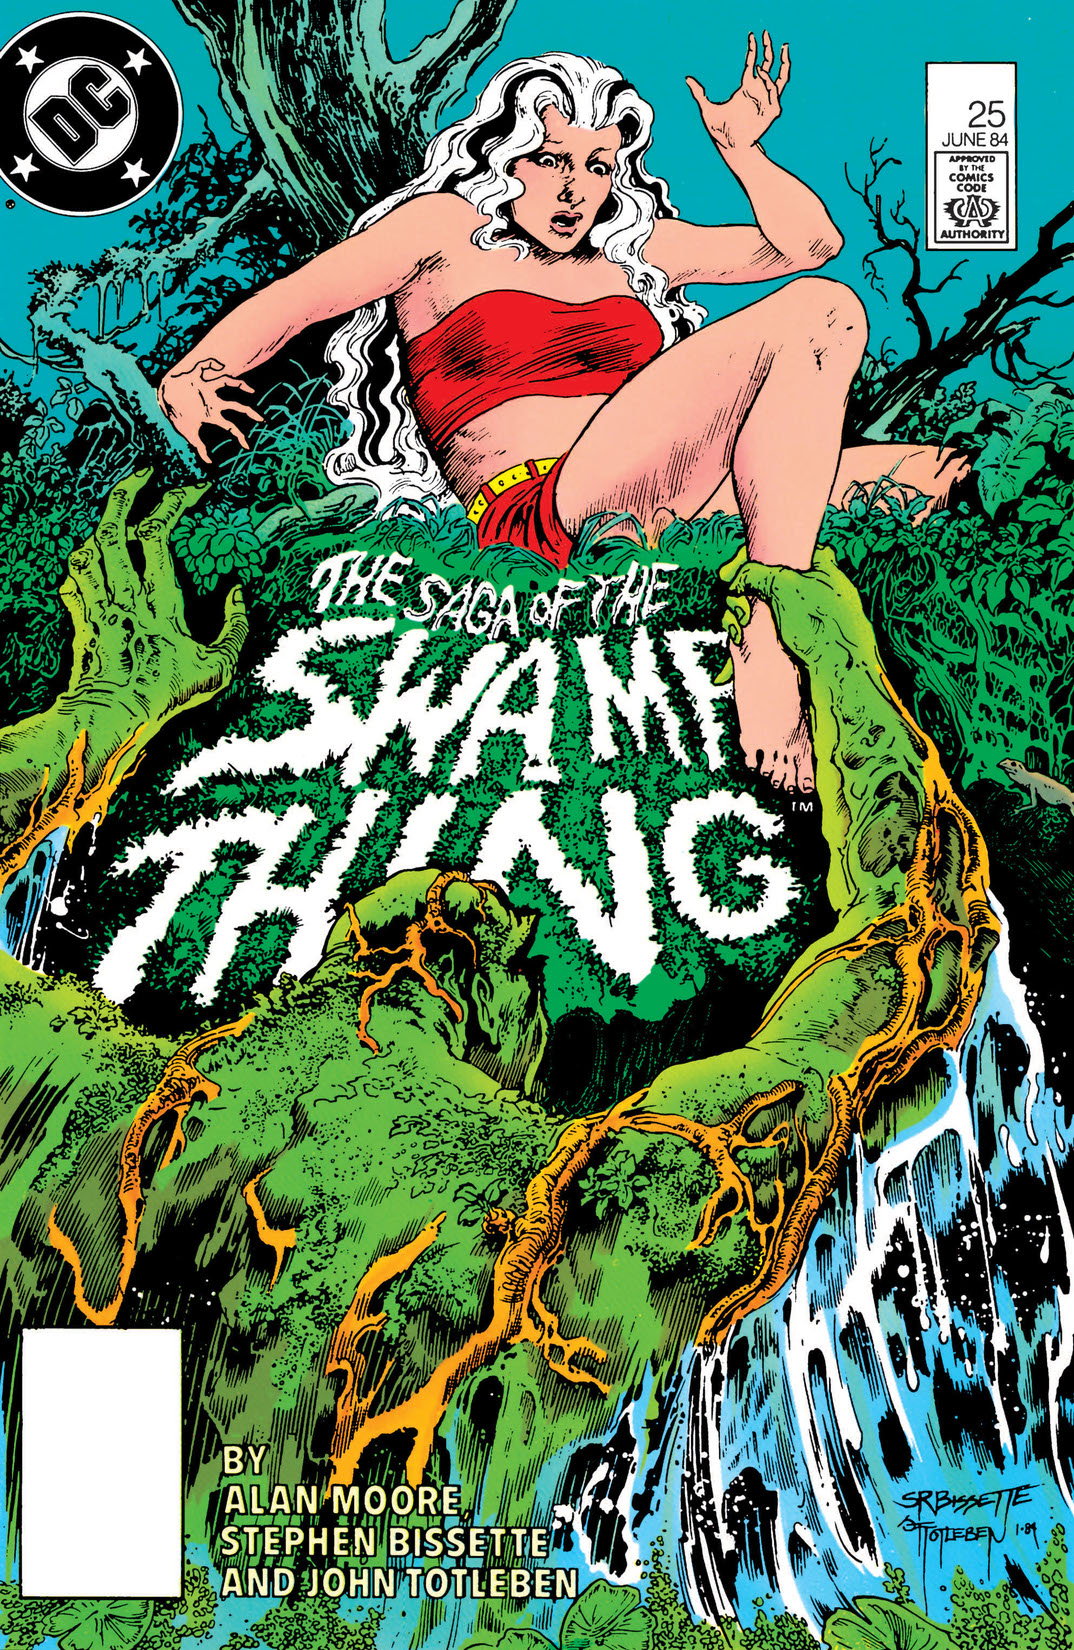 The Saga of the Swamp Thing (1982-) #25 preview images